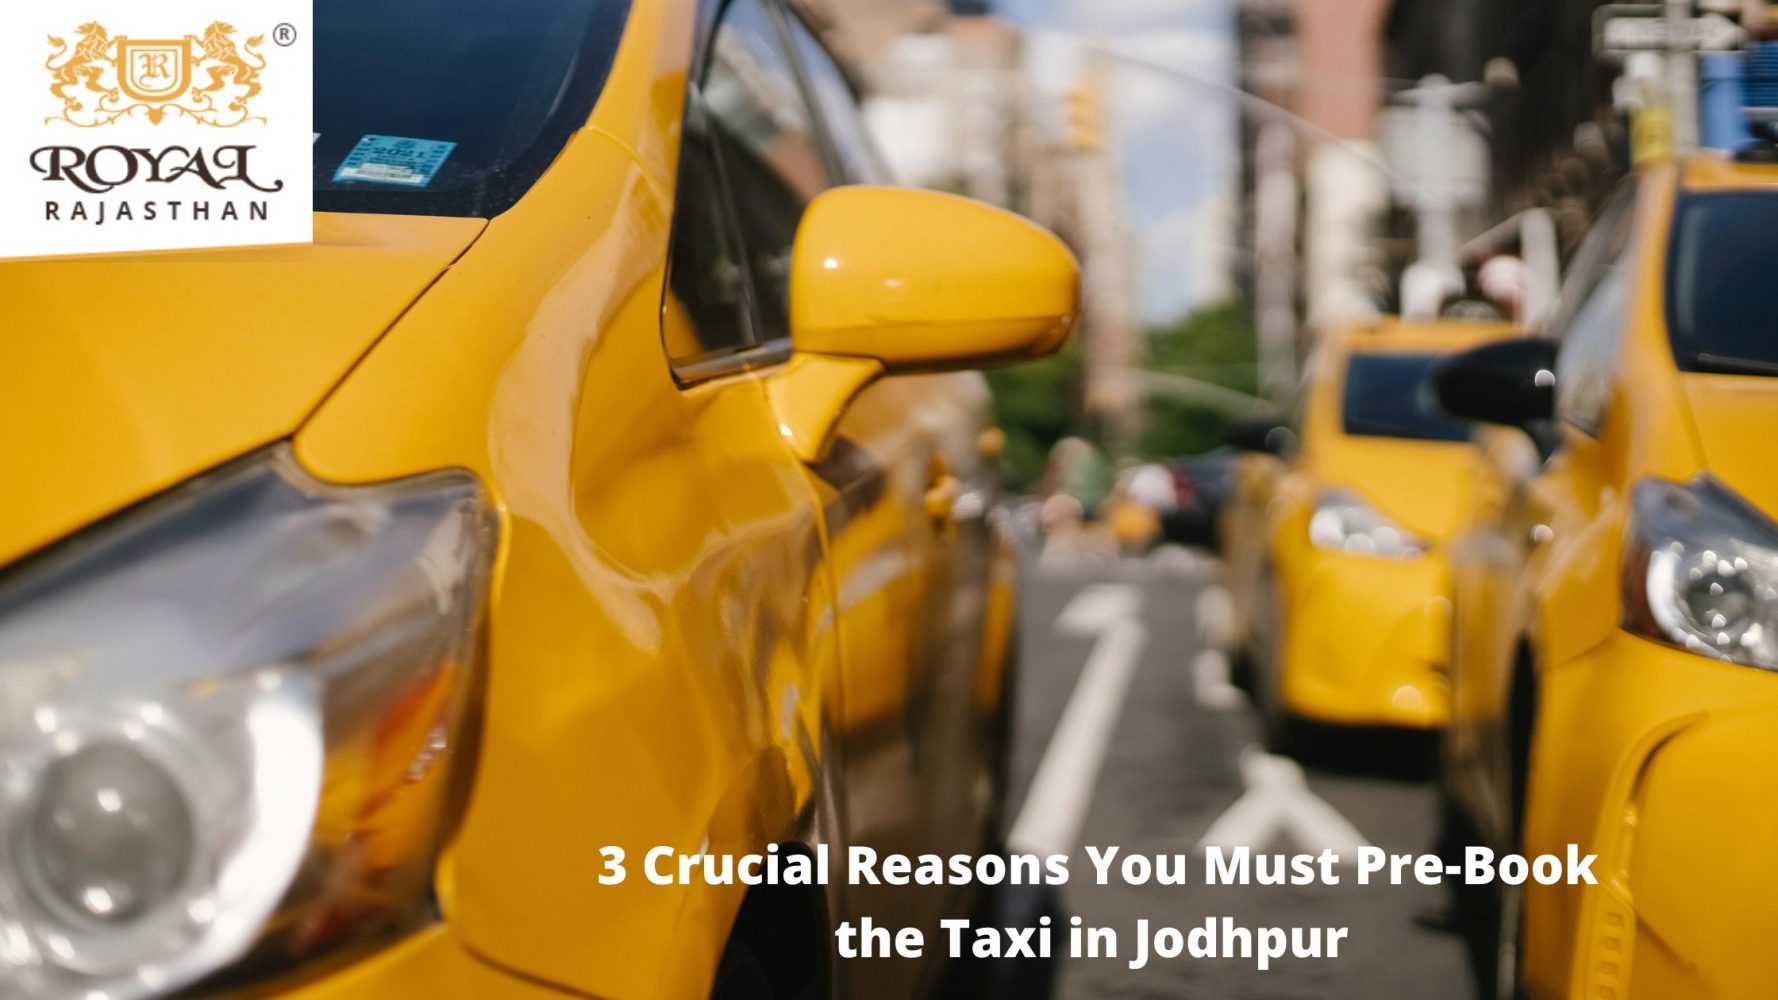  3 Principal Reasons Why You Need to Pre-Book the Taxi in Jodhpur 